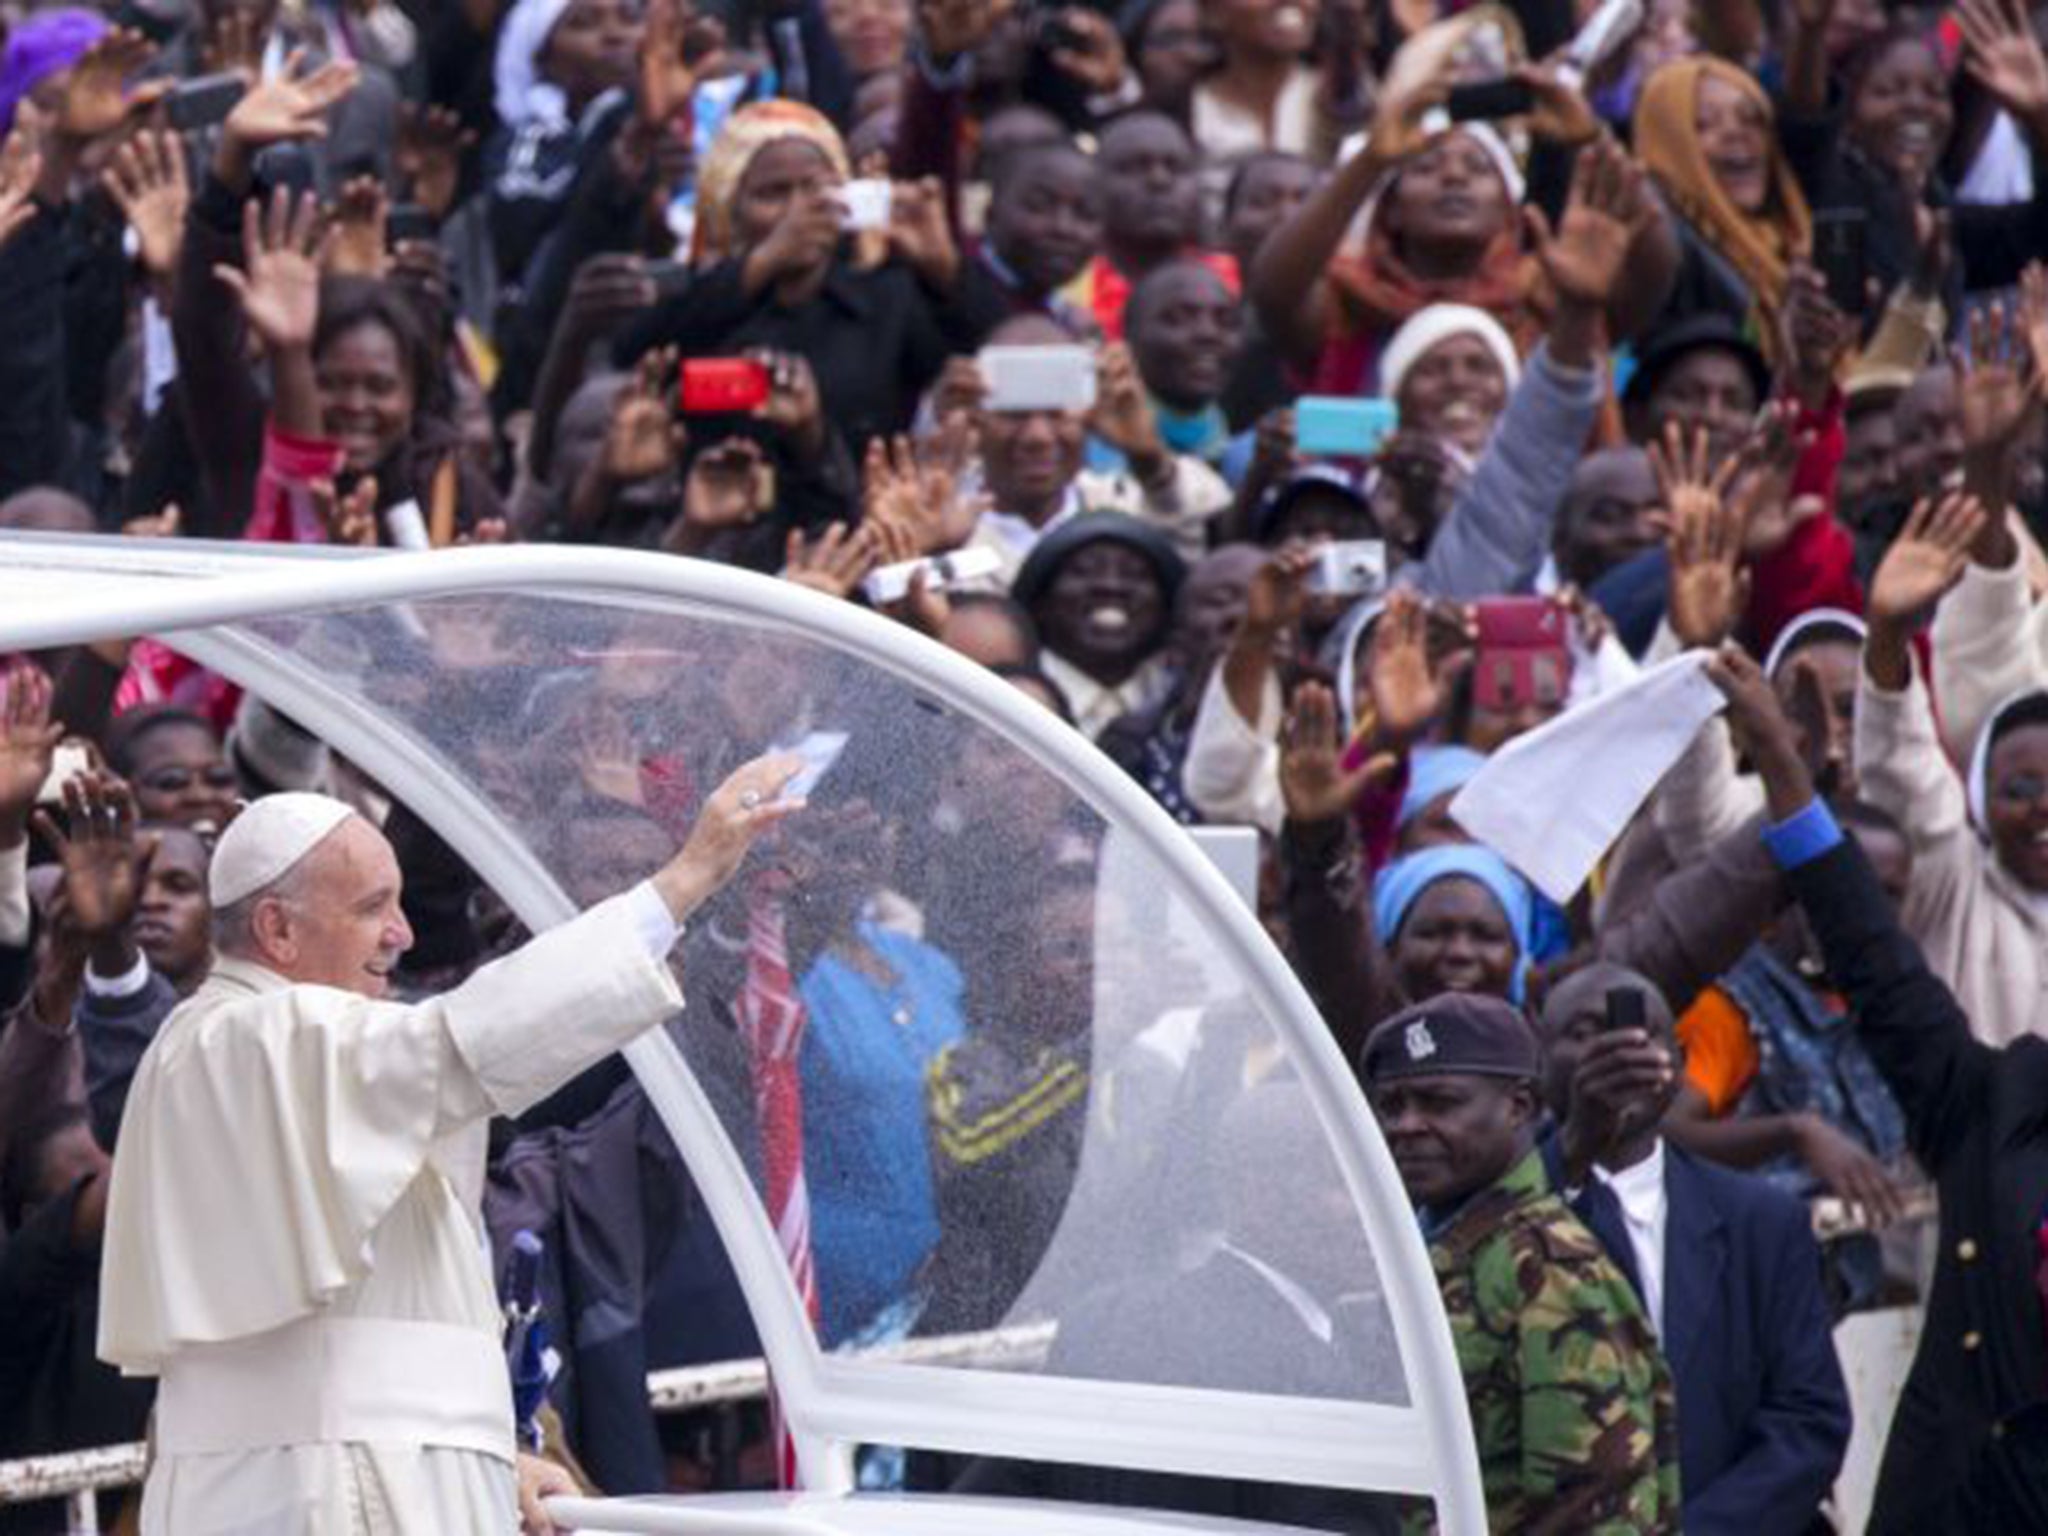 Pope Francis arrives at the University of Nairobi to deliver an open-air mass